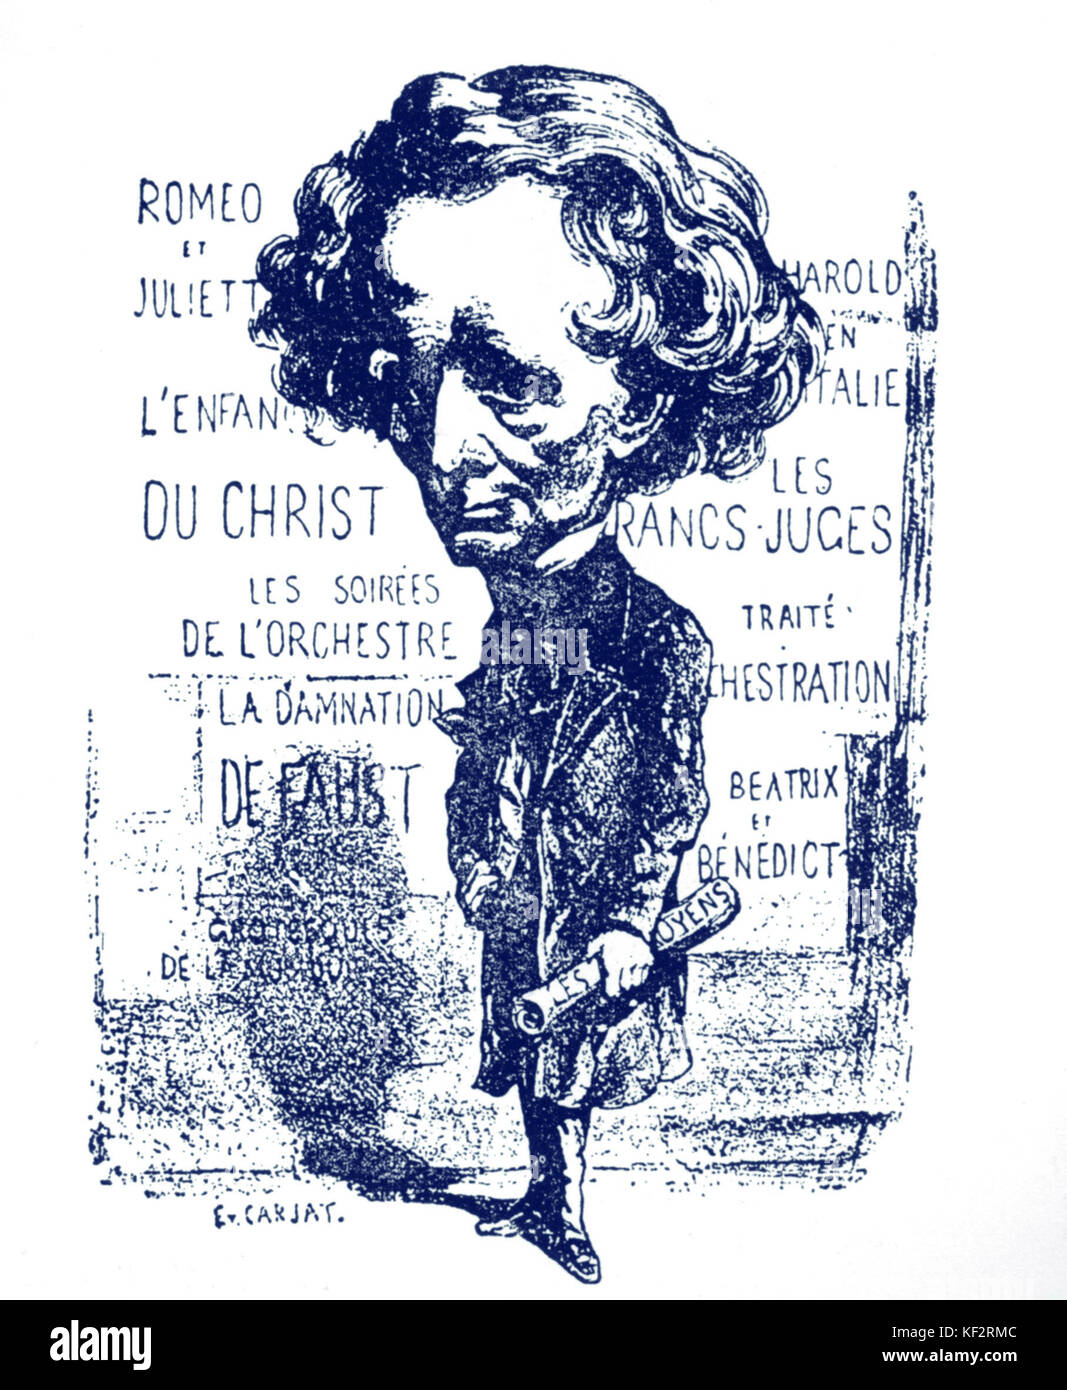 Berlioz caricature by Carjat. Titles of his works in the background. French composer, 1803-1869. Stock Photo